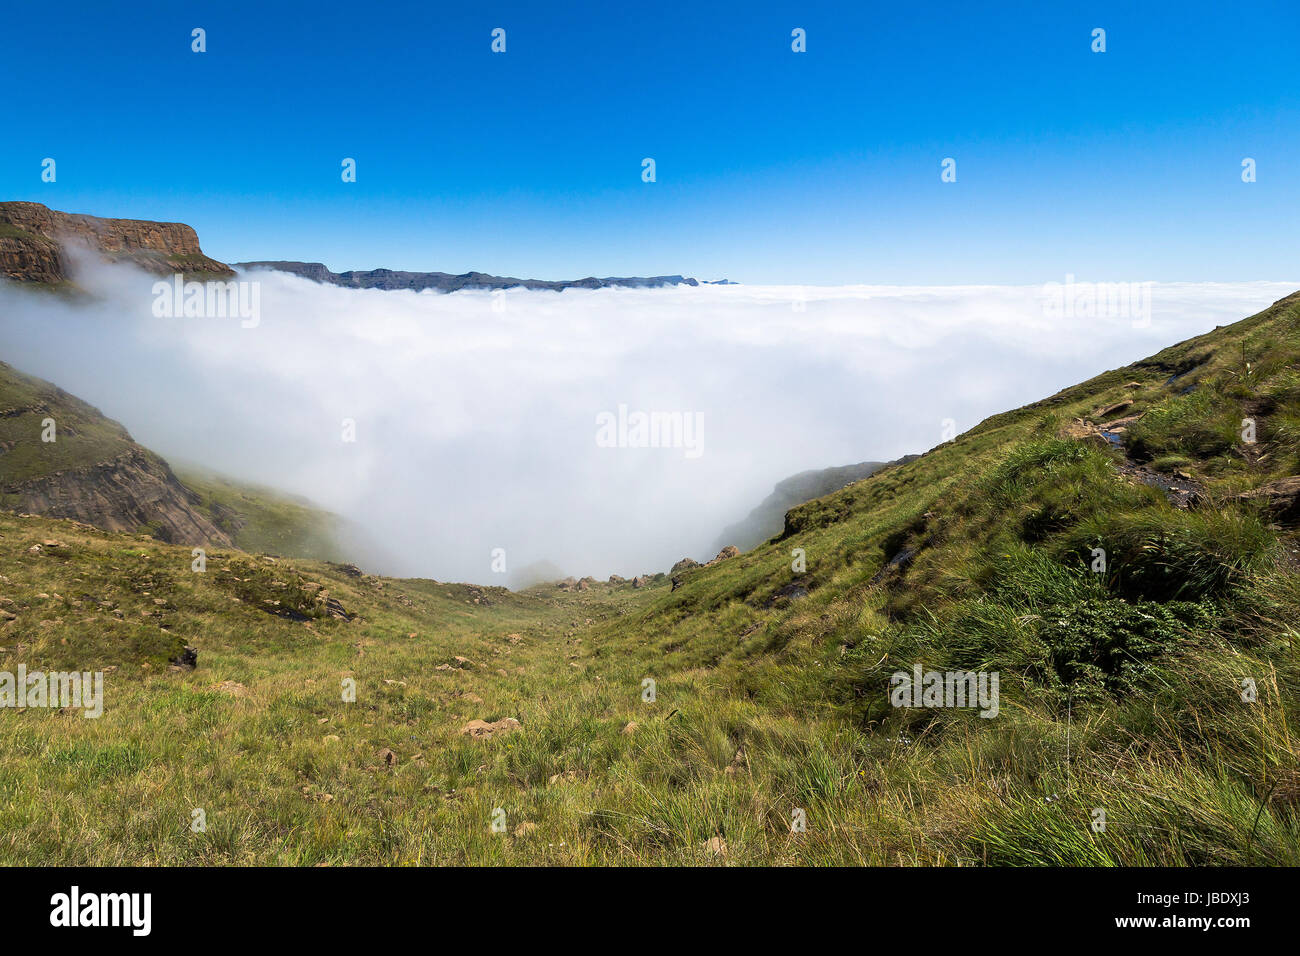 Above the clouds on Sentinel Hike, Drakensberge, South Africa Stock Photo